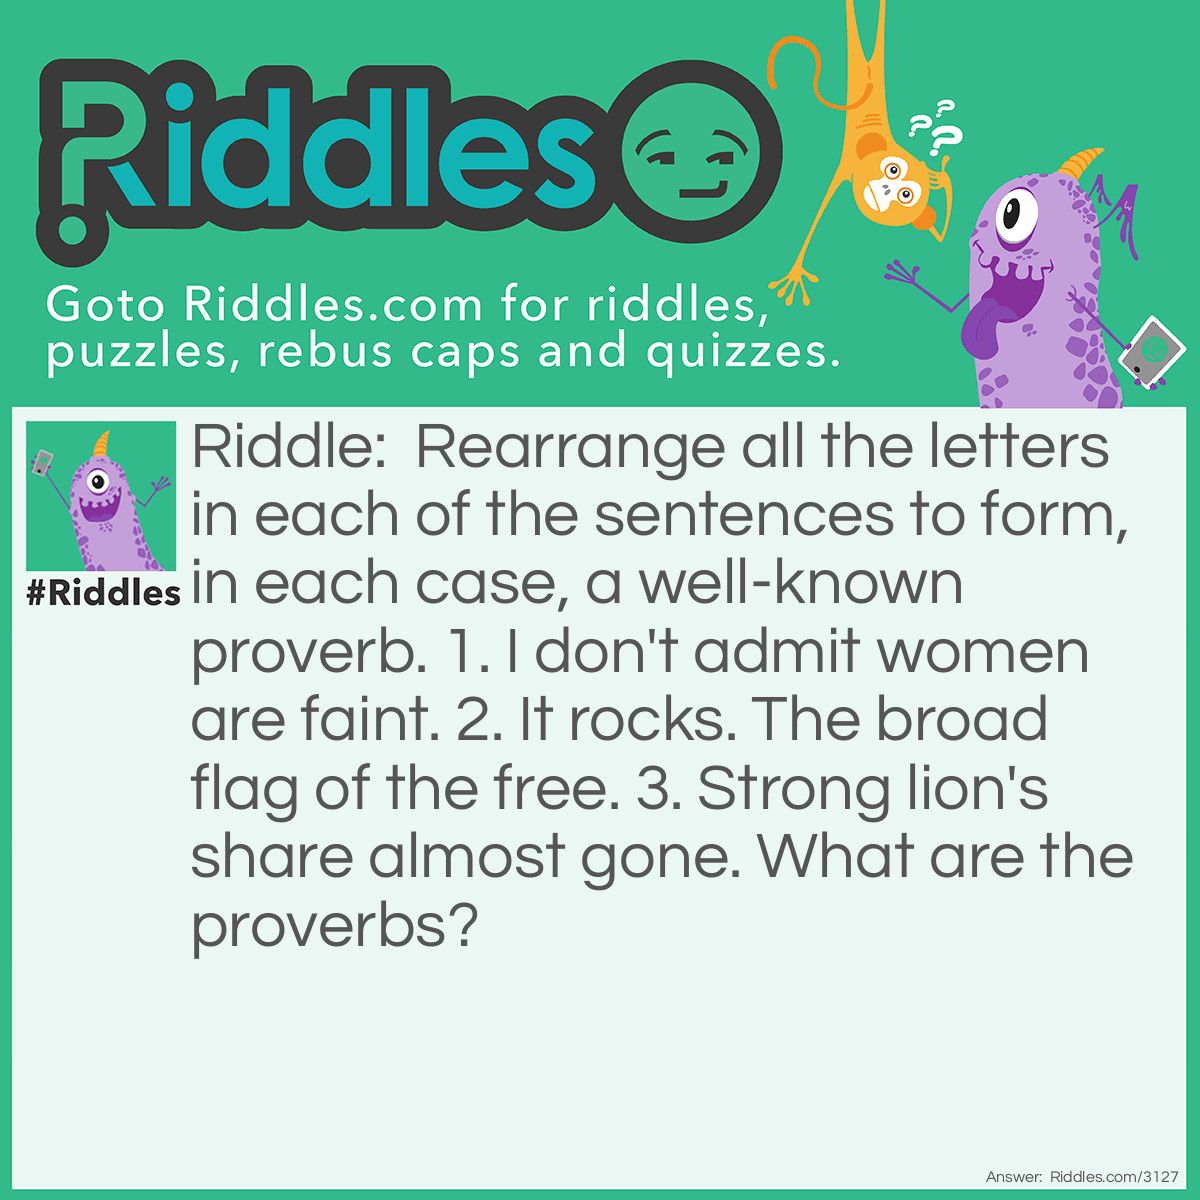 Riddle: Rearrange all the letters in each of the sentences to form, in each case, a well-known proverb. 
1. I don't admit women are faint. 
2. It rocks. The broad flag of the free. 
3. Strong lion's share almost gone. 
What are the proverbs? Answer: 1. Time and tide wait for no man.
2. Birds of a feather flock together.
3. A rolling sone gathers no moss.